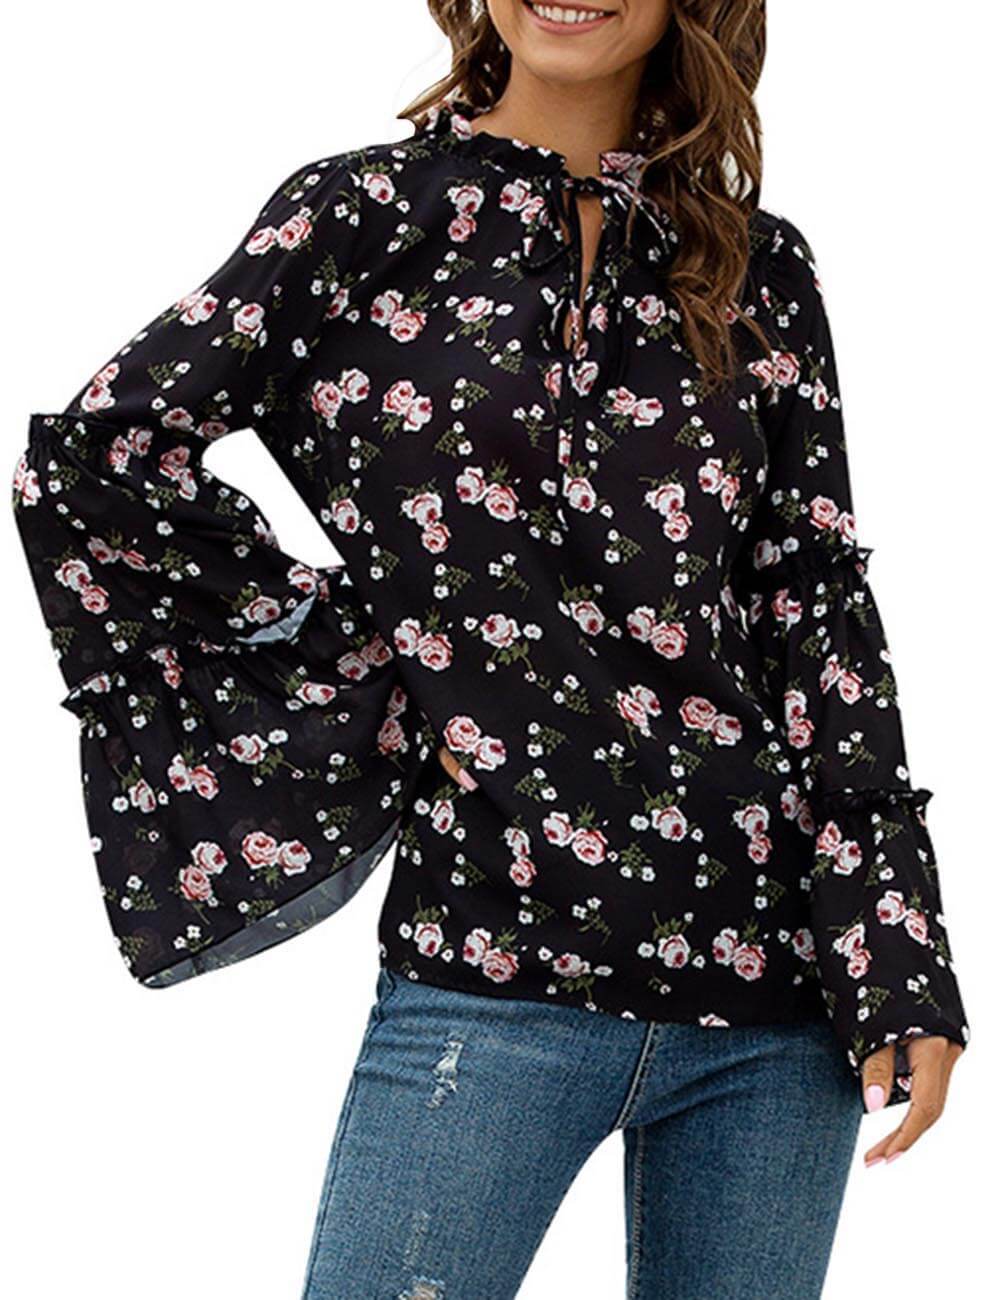  Women‘s Boho Floral Printed Tie Neck Tops Summer Flared Bell Sleeve Chiffon Loose Blouses T-Shirt